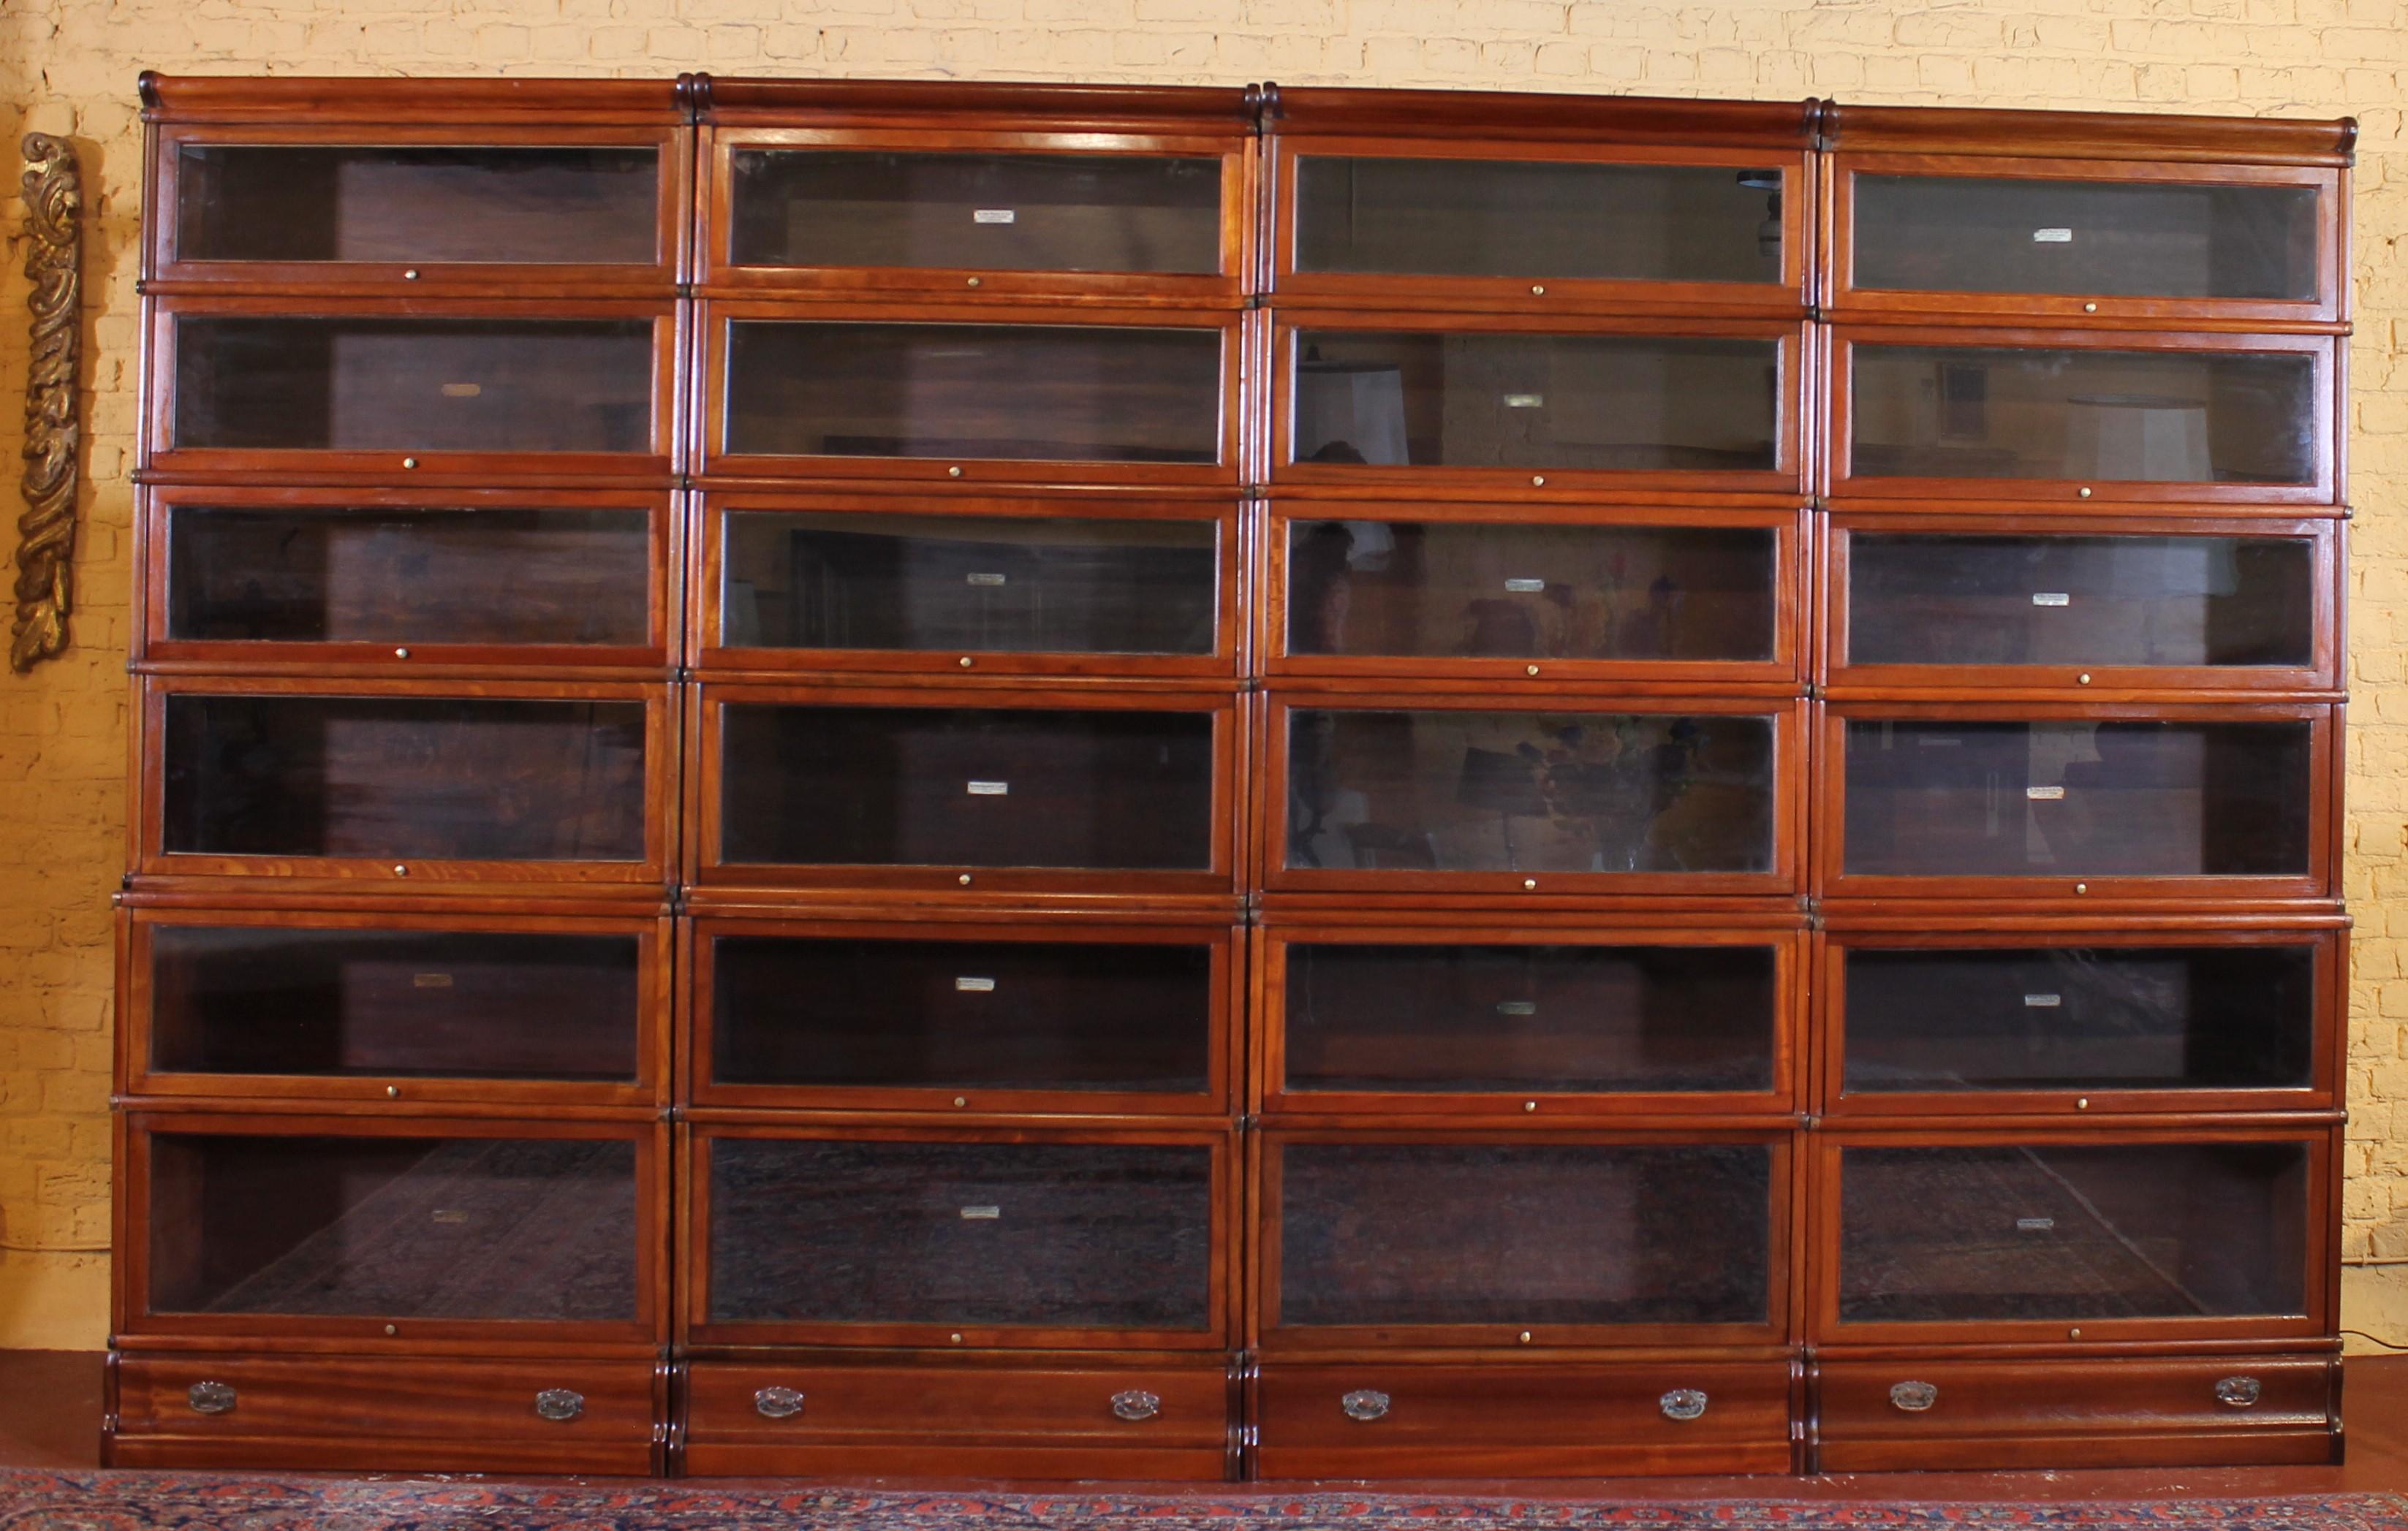 Elegant set of four large Globe Wernicke London mahogany bookcases from the end of the 19th century - Early 20th century from England which have two lower advanced part (the two lower elements are deeper) as well as a drawer in their base

The four